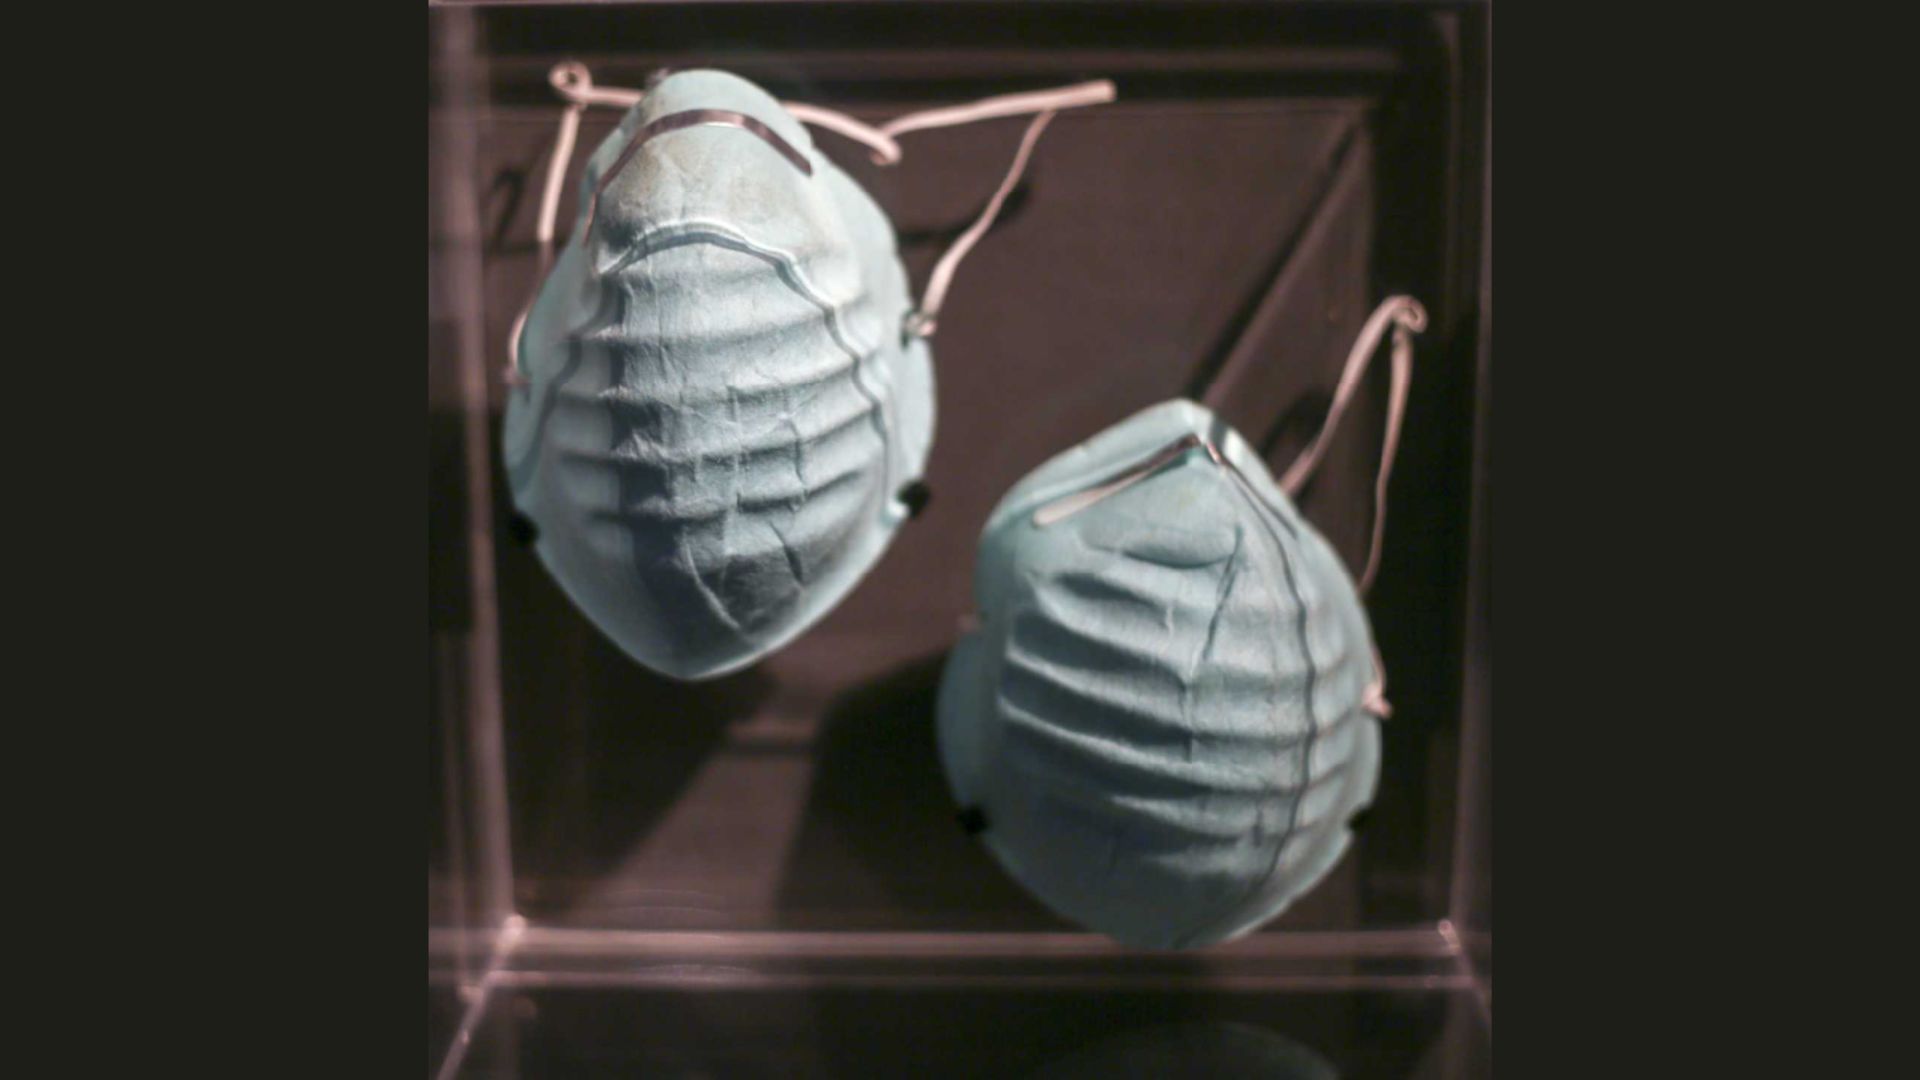 A pair of respiratory masks on display